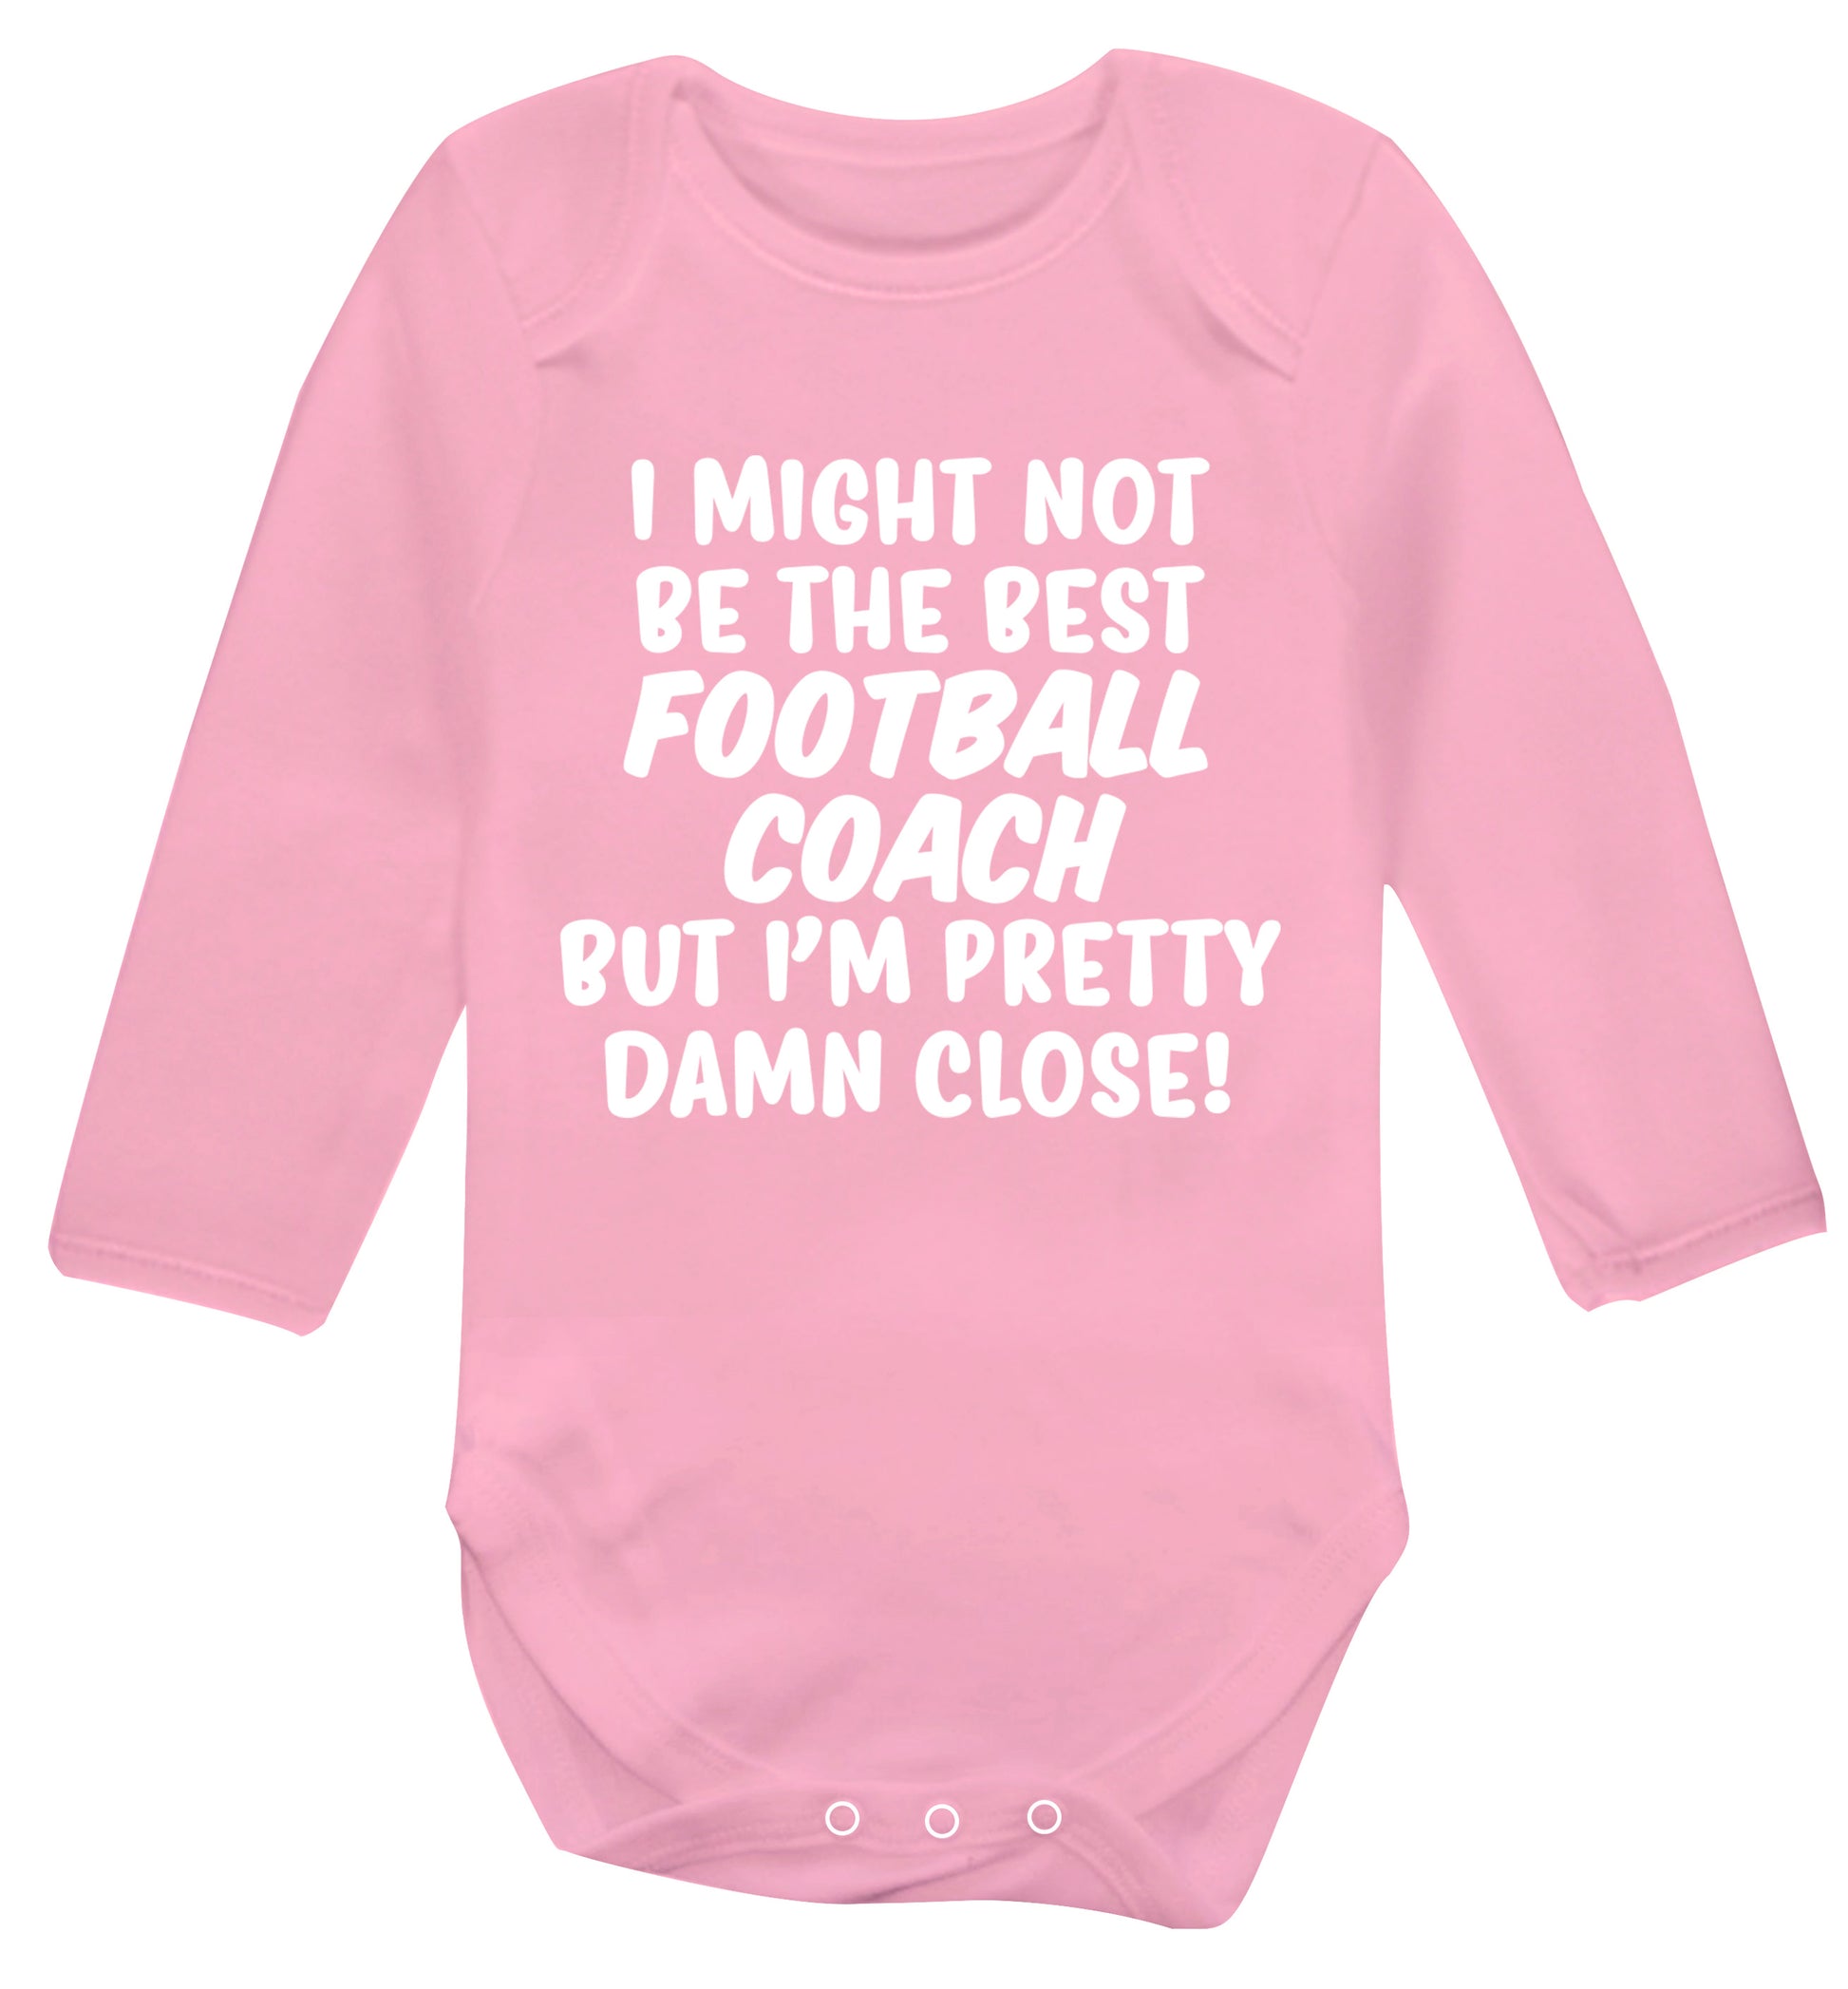 I might not be the best football coach but I'm pretty close! Baby Vest long sleeved pale pink 6-12 months